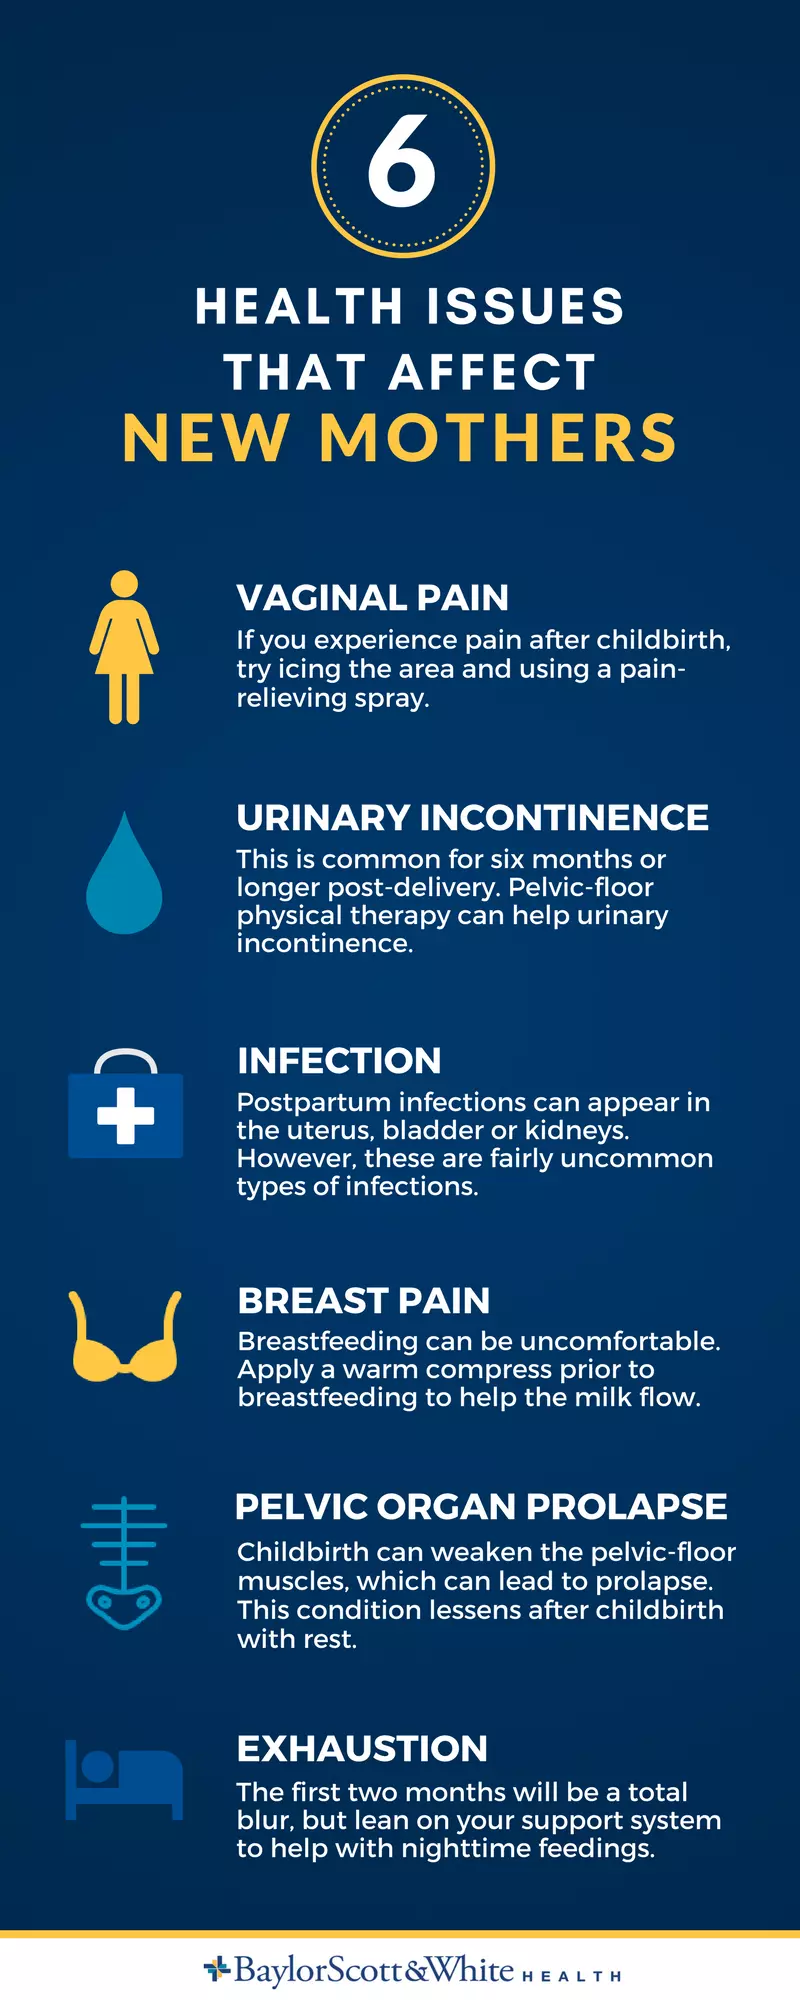 Common questions about breastfeeding and pain